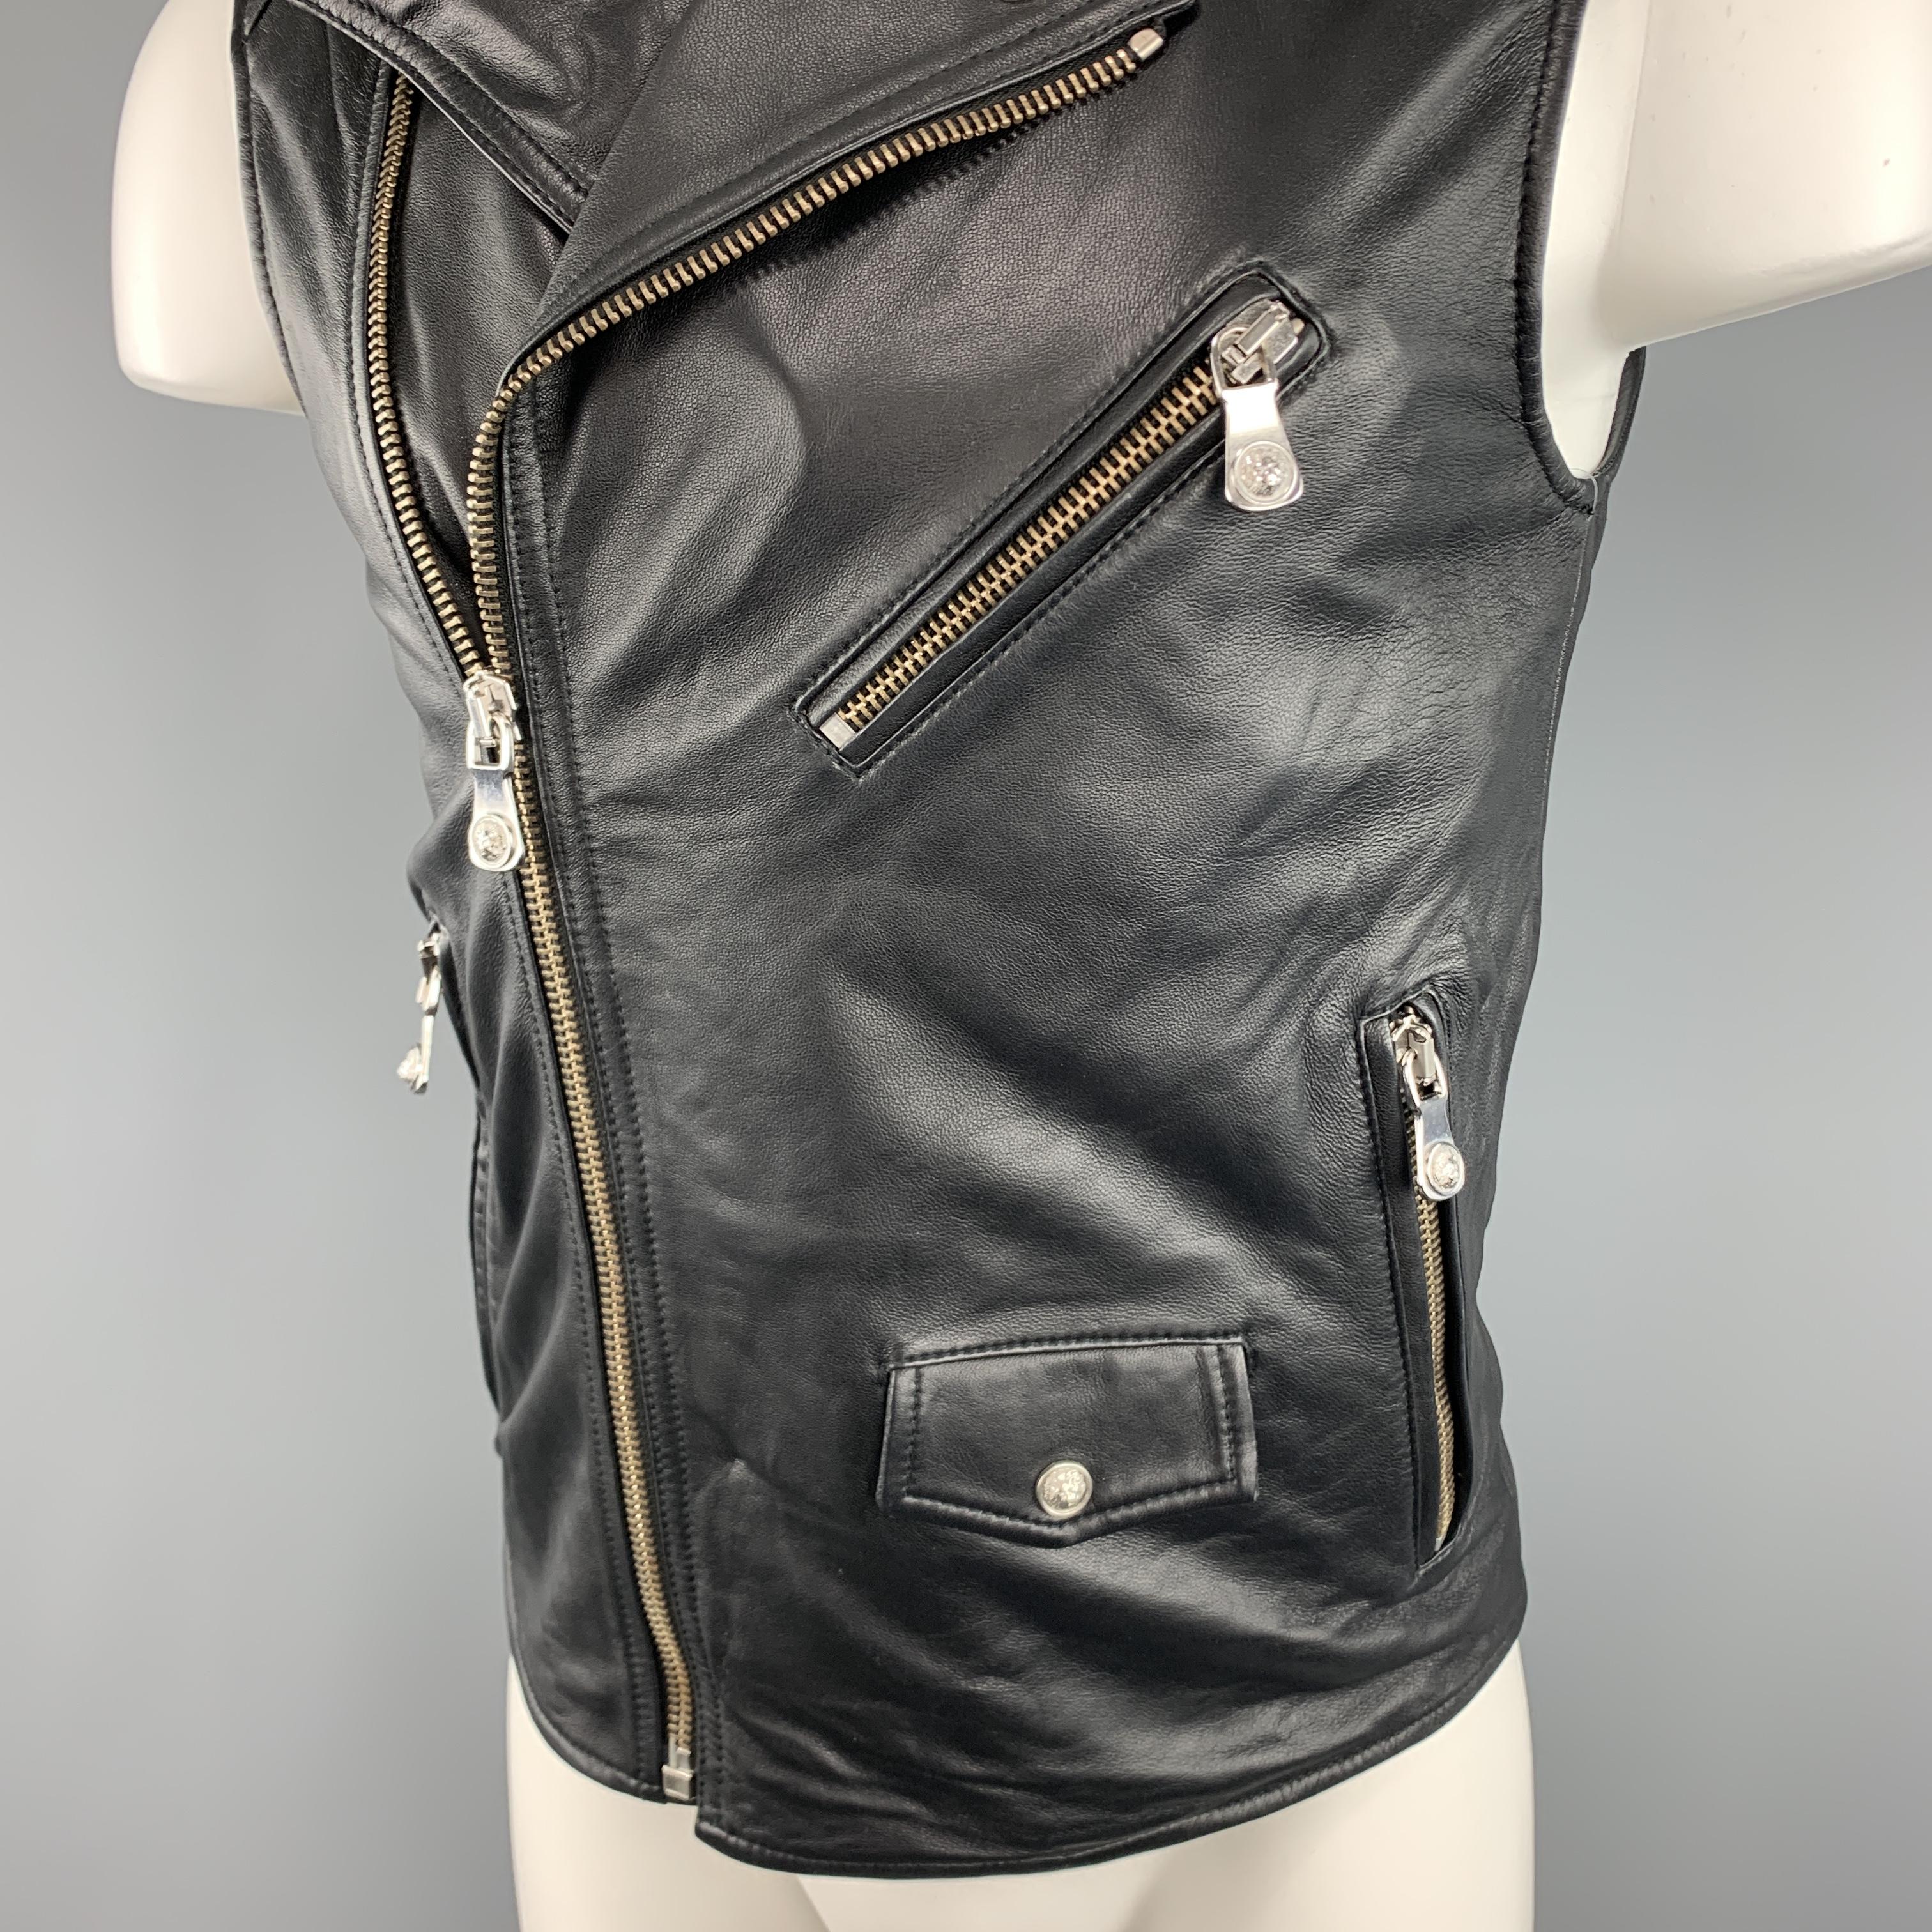  VERSUS by GIANNI VERSACE biker style moto vest come sin soft black leather with a pointed collar lapel detailed with silver tone lion head studs, three slanted zip pockets with lion head pulls, asymmetrical zip closure, and tab snap pocket. 

Very